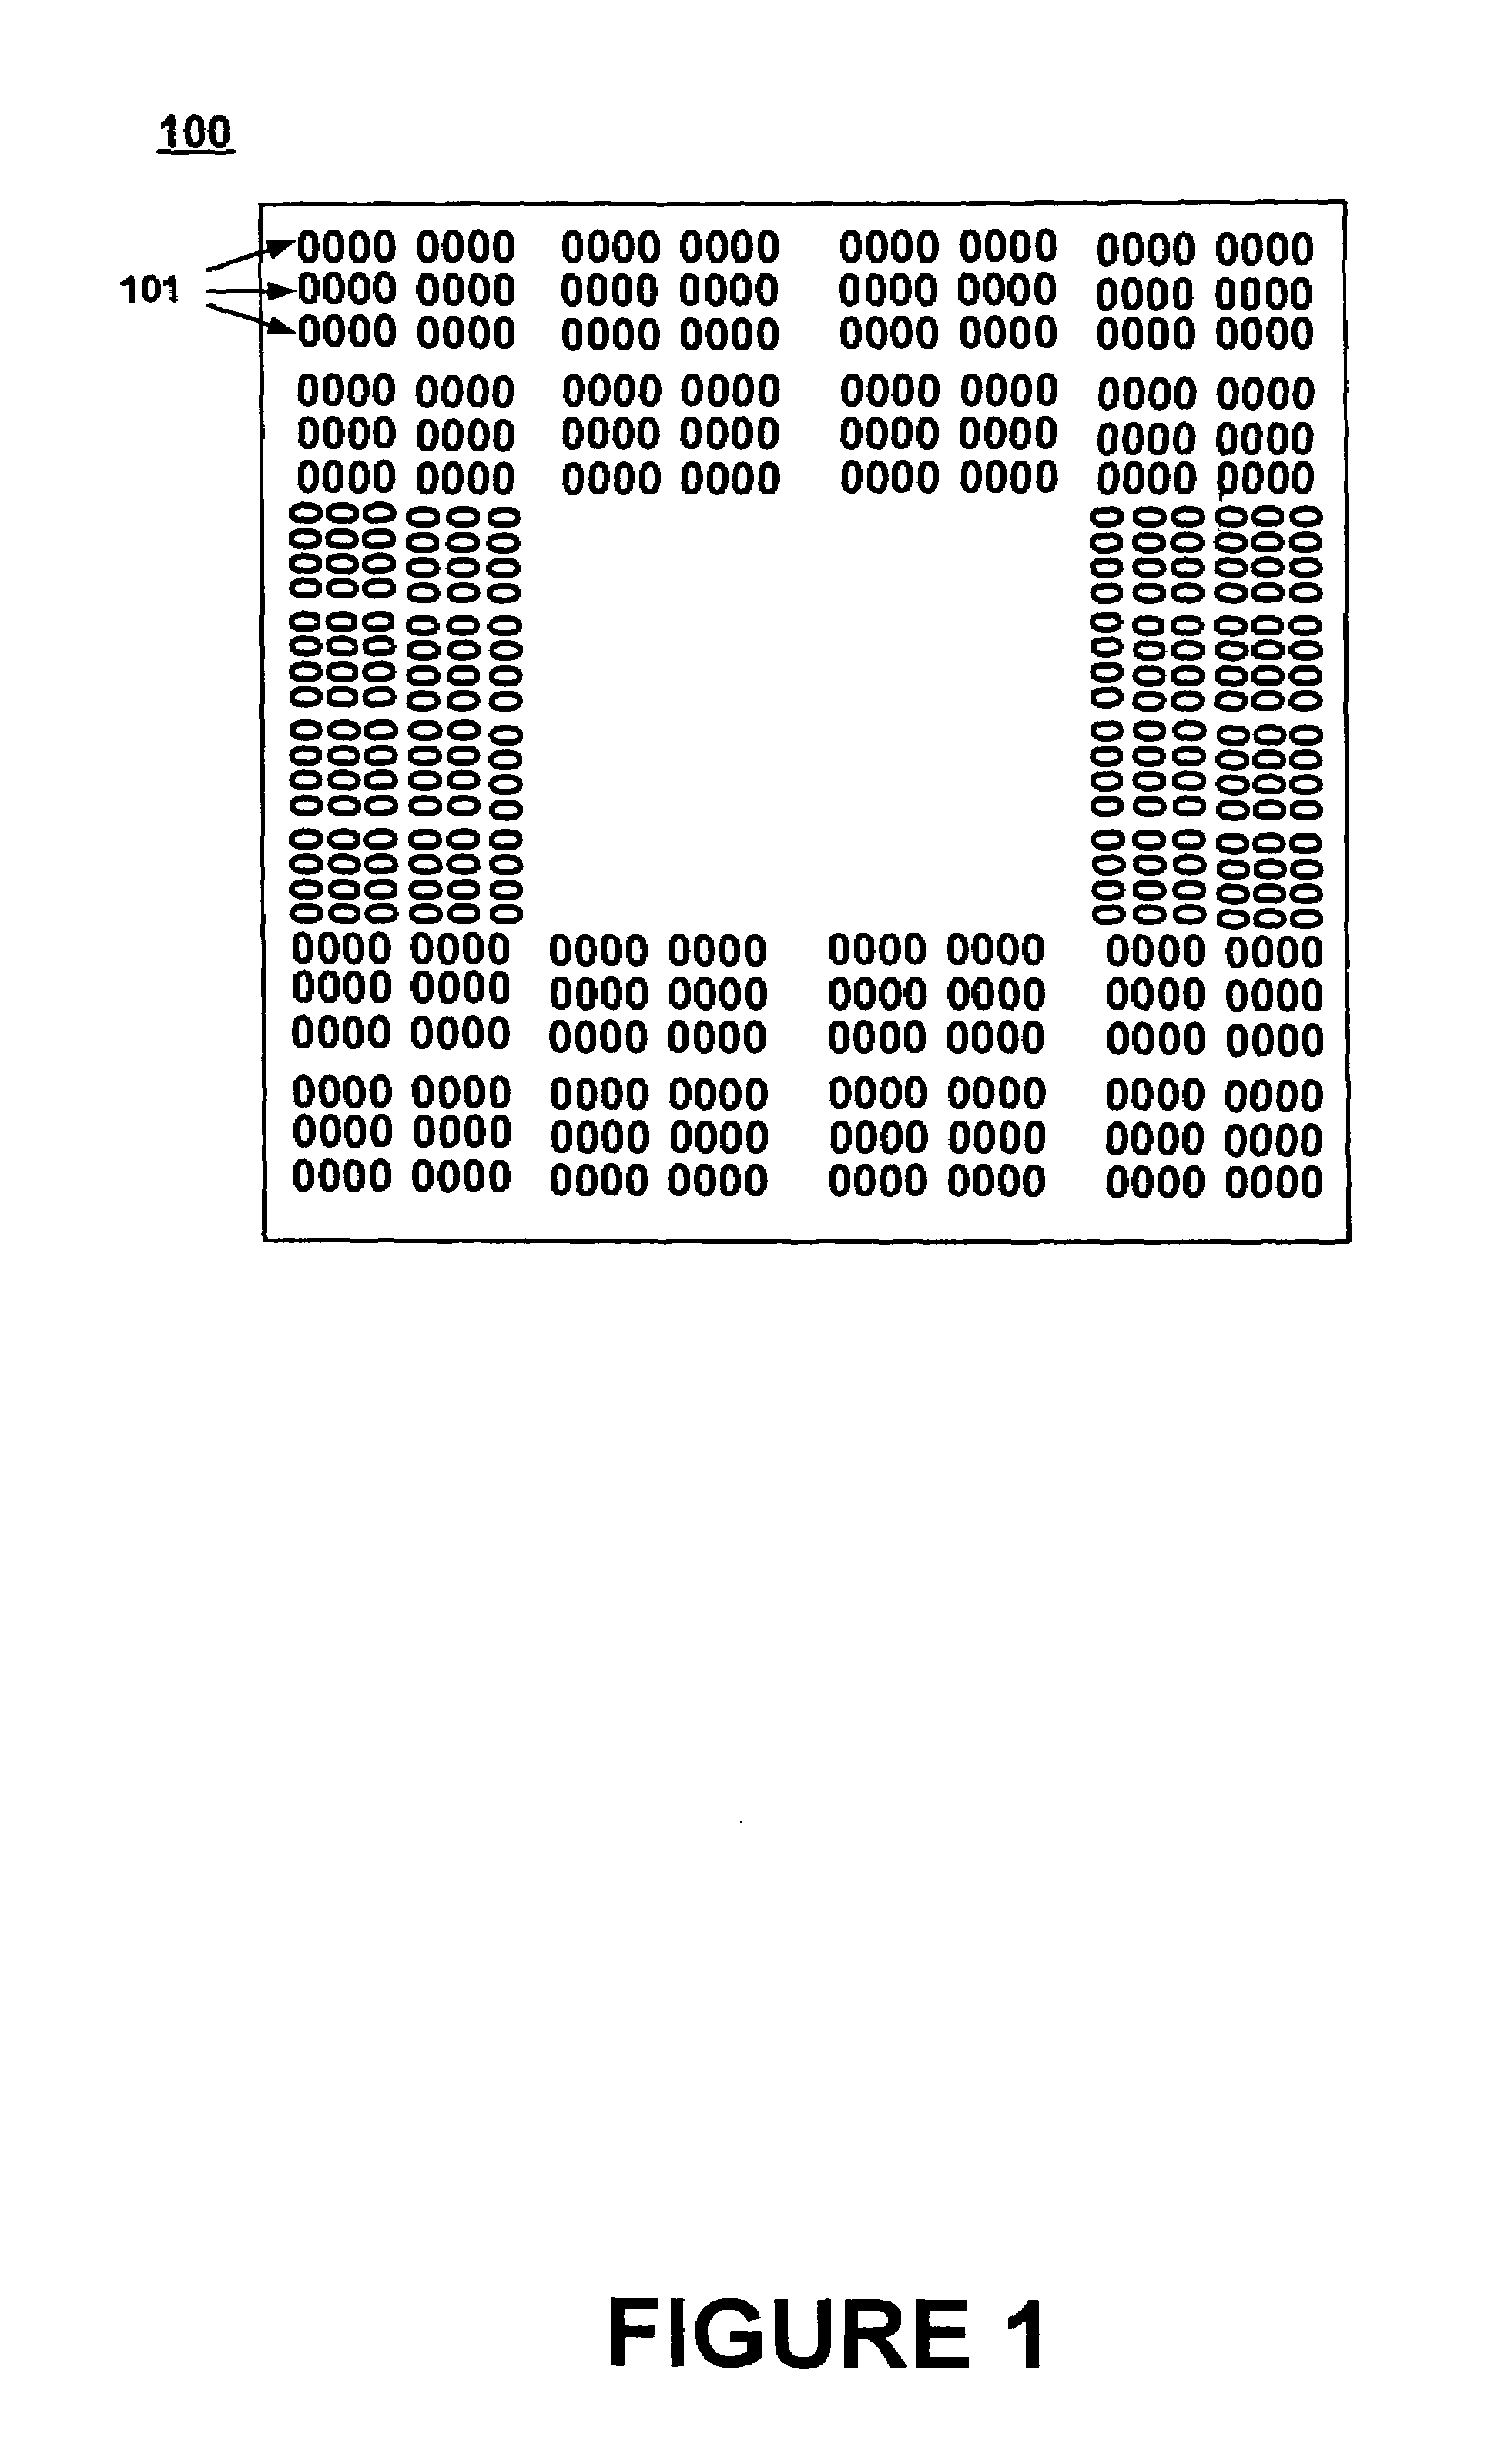 System for arraying surface mount grid array contact pads to optimize trace escape routing for a printed circuit board